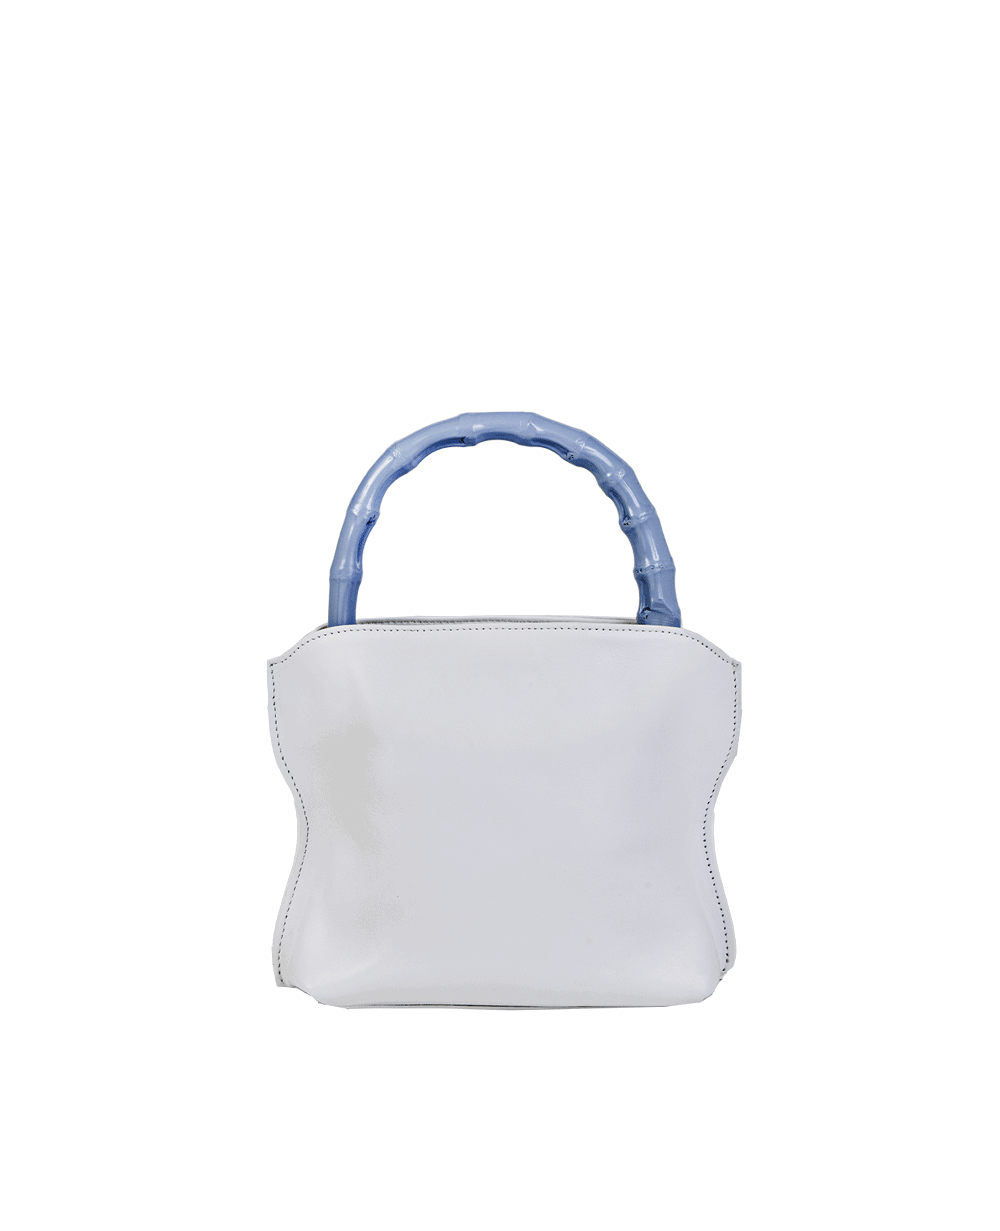 Cross-body bag in calf leather with detachable shoulder strap. Bamboo handles. Made In Italy. Two compartments, zip pocket in the back compartment. Magnetic flap closure with logo. Color: Ivory. Size: Medium